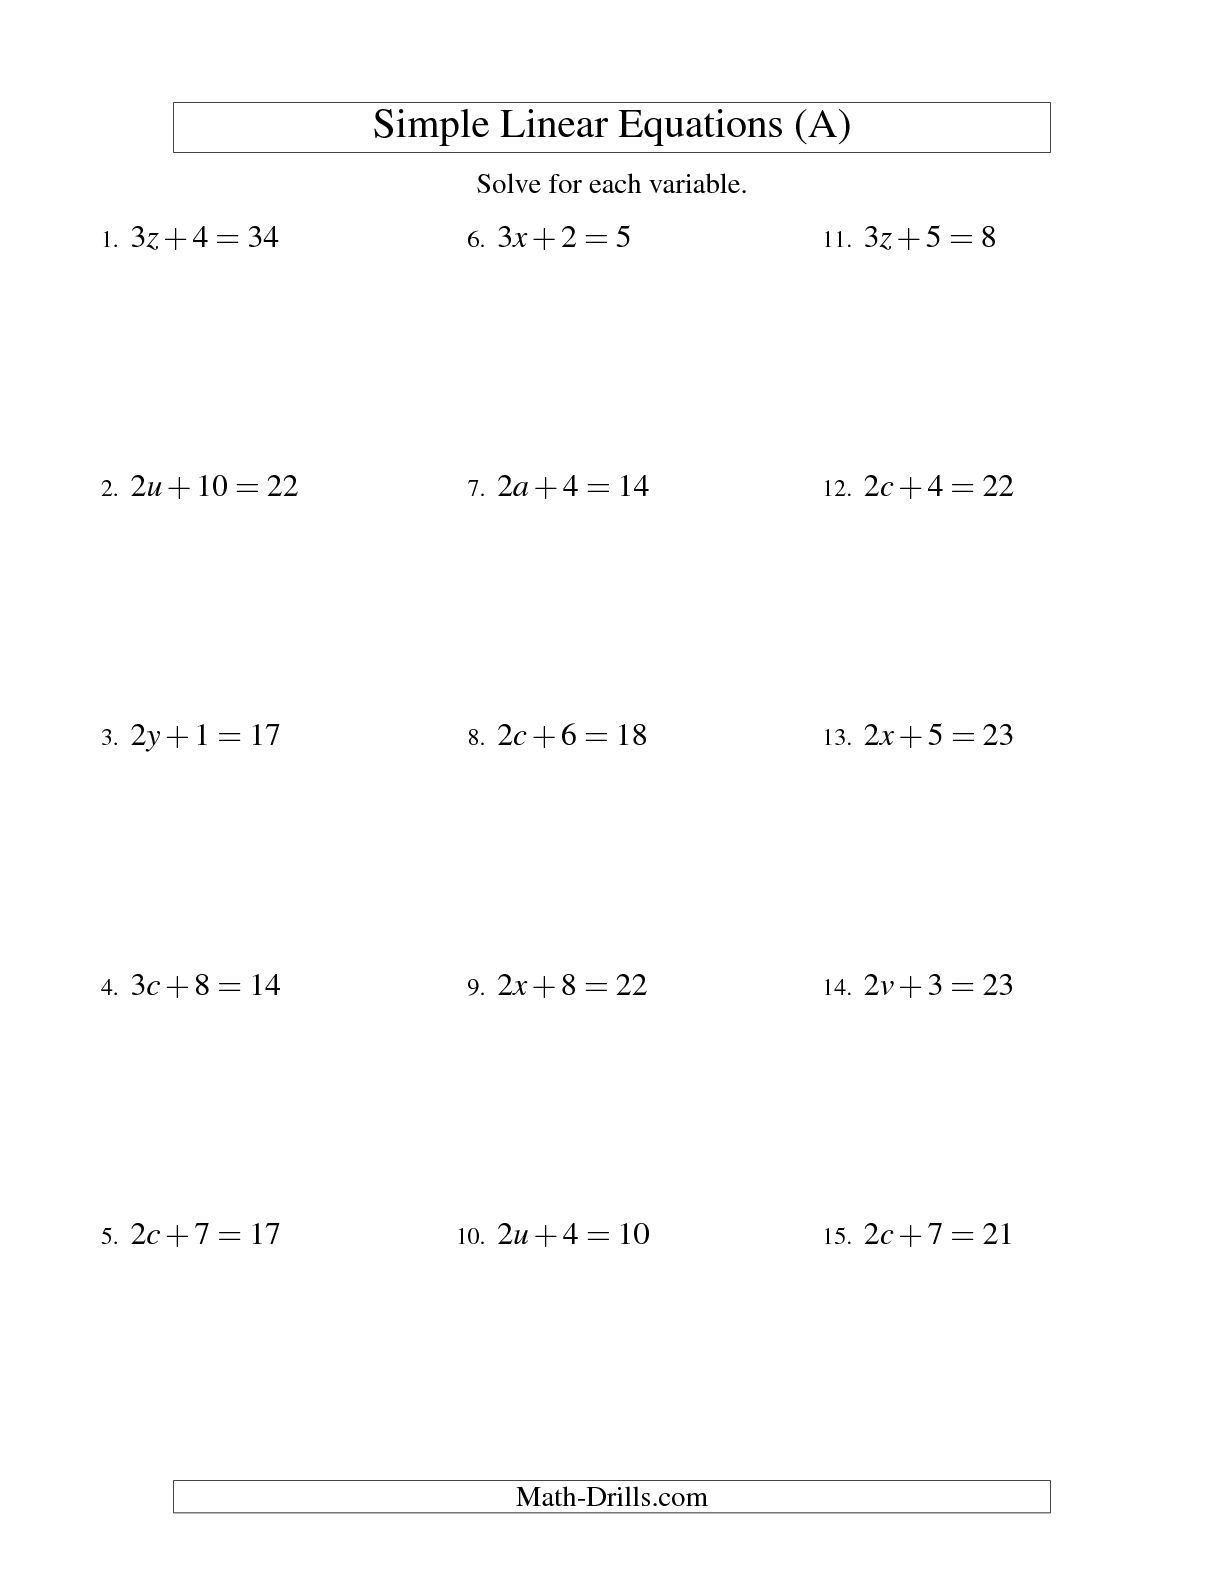 Solving Polynomial Equations Worksheet Answers solving Polynomial Equations Worksheet Answers the solving